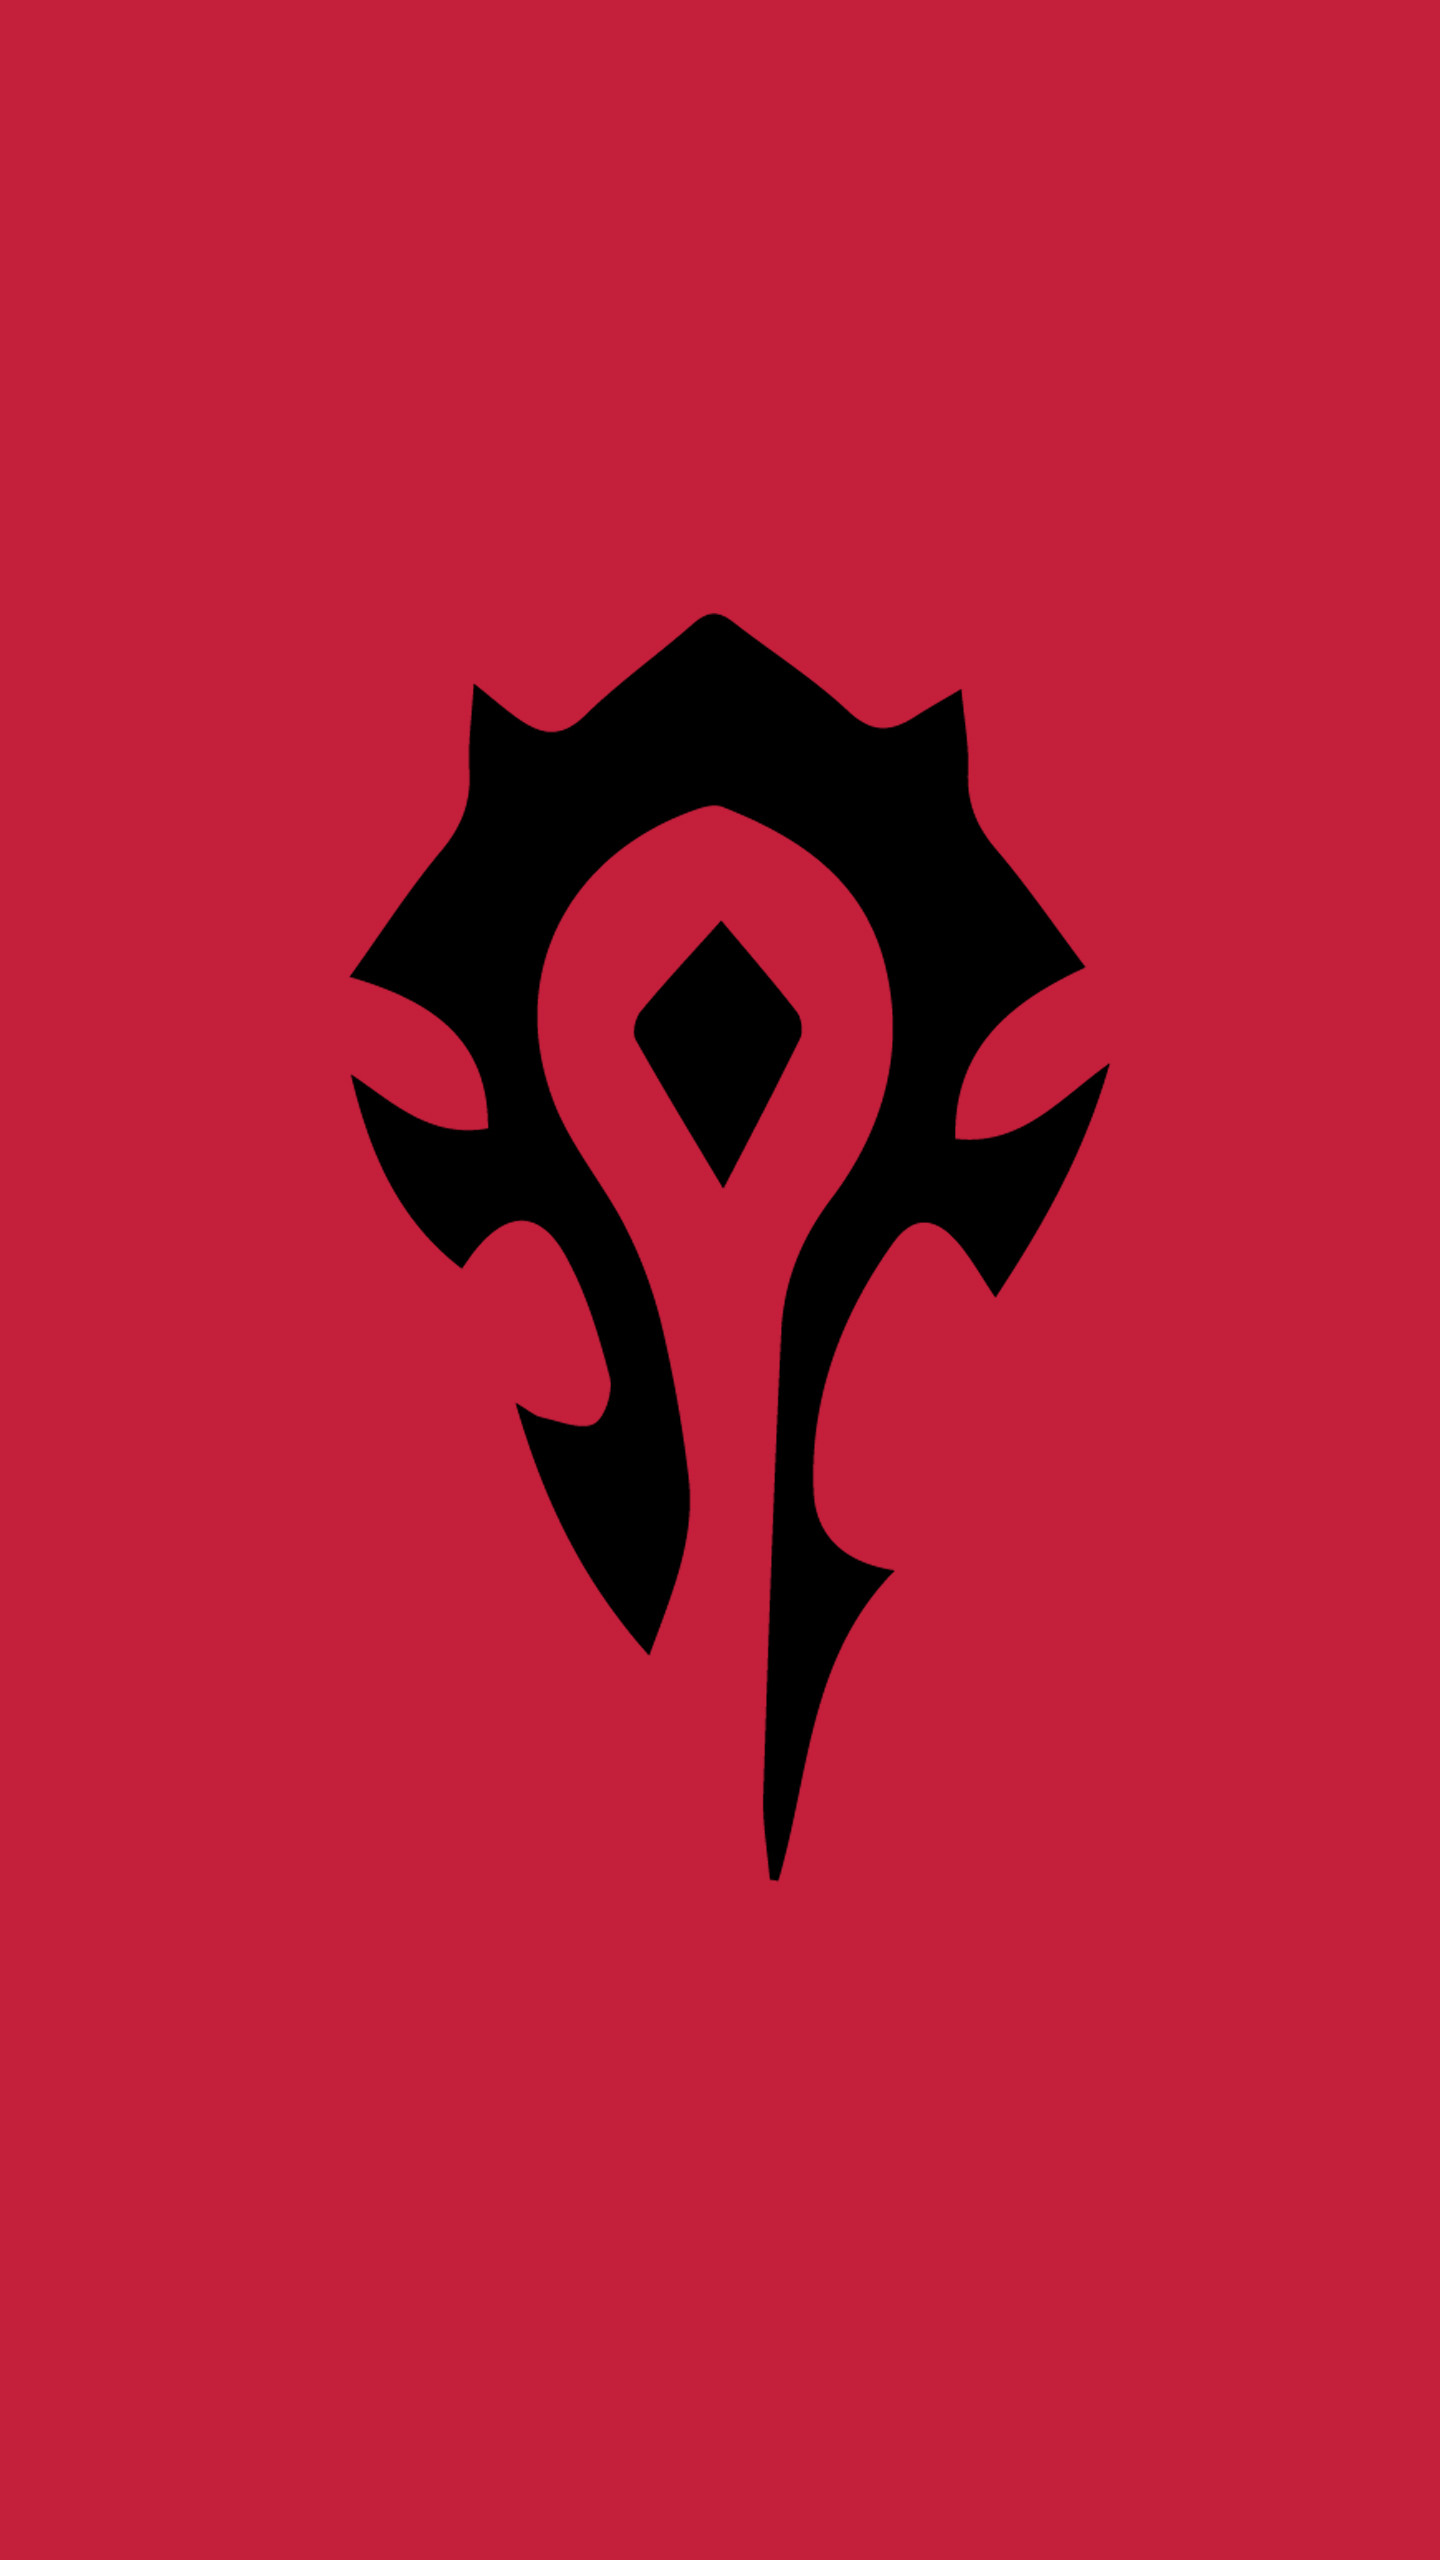 1440x2560 Made a Horde phone wallpaper for myself, thought I'd share.